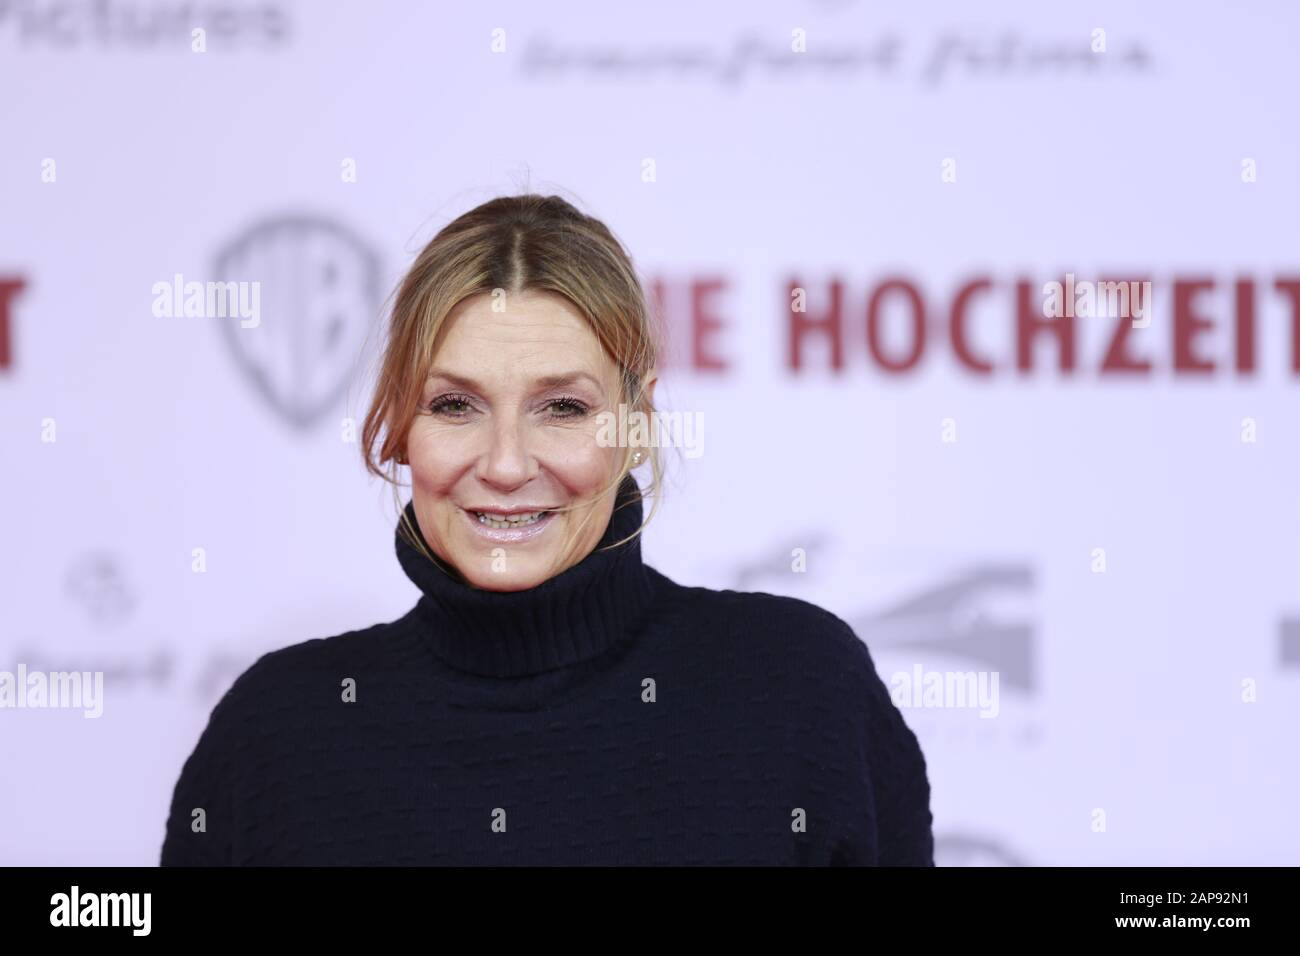 01/21/2020, Berlin, Germany, Kim Fisher attend the world Premiere 'DIE HOCHZEIT“  at the Zoo Palast  on January 21th, 2020 in Berlin, Germany. A Til Schweiger movie 'DIE HOCHZEIT' is a romantic comedy. Stock Photo